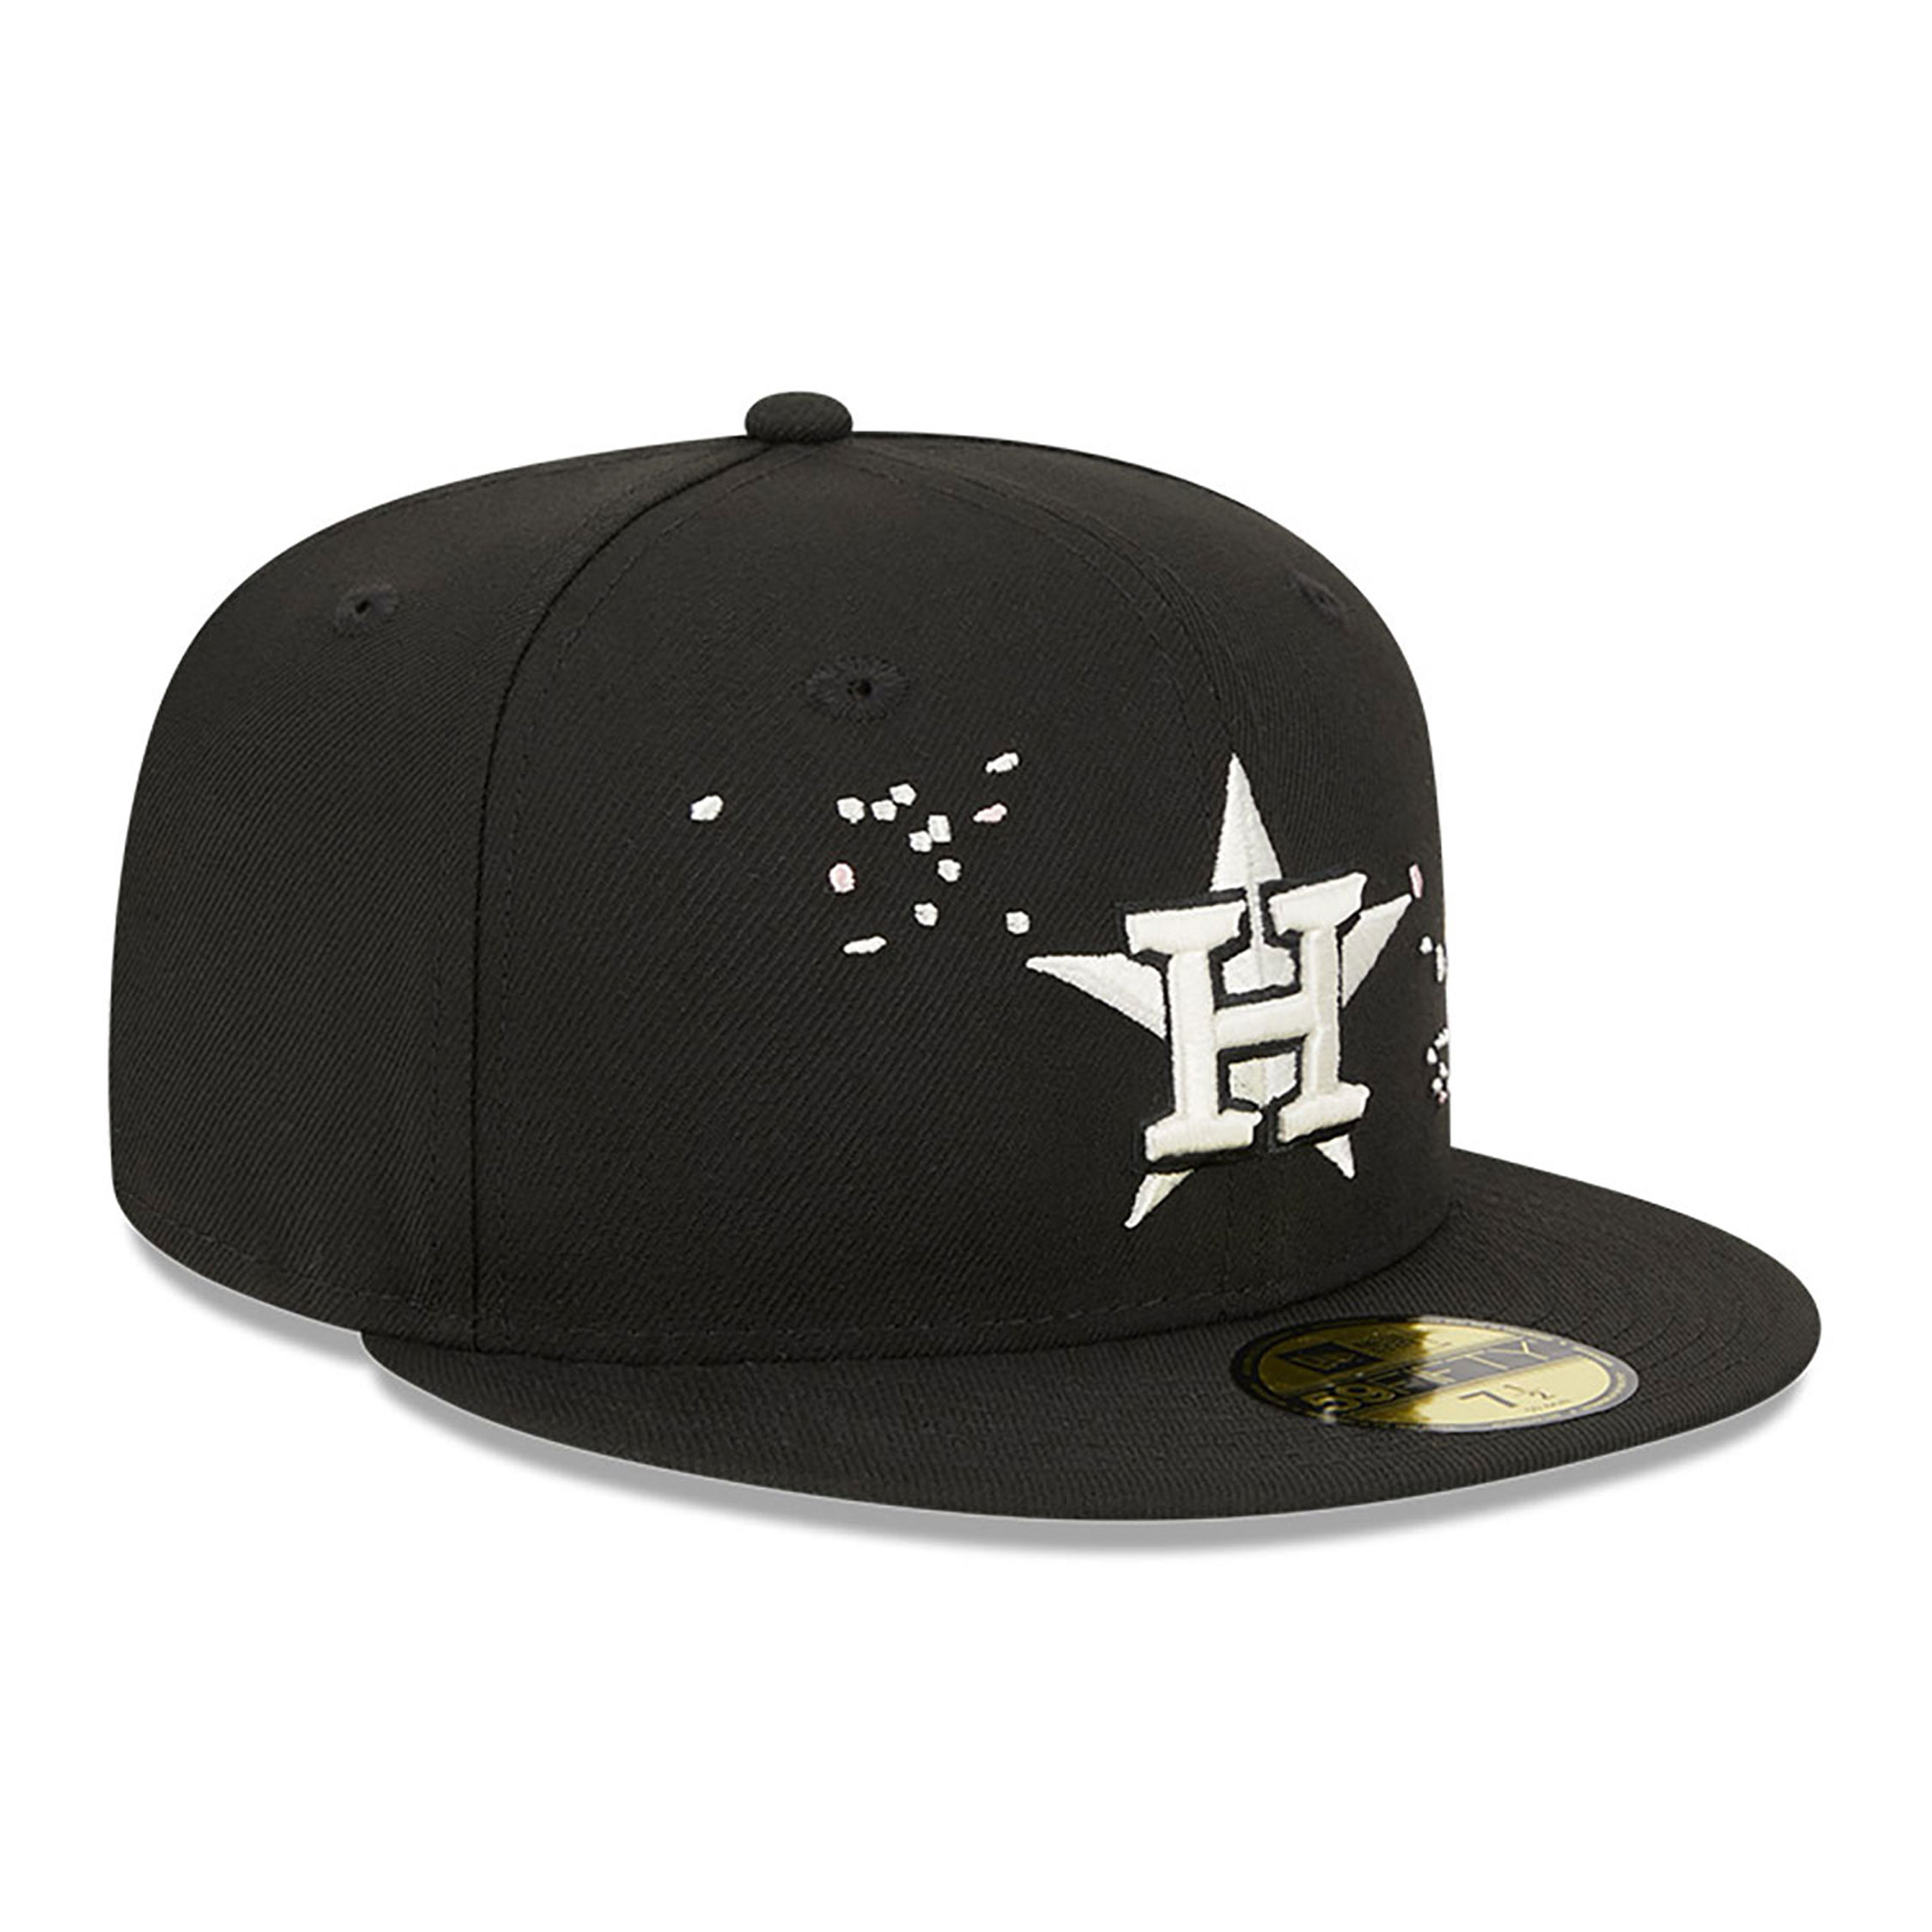 Houston Astros Cherry Blossom Black 59FIFTY Fitted Cap